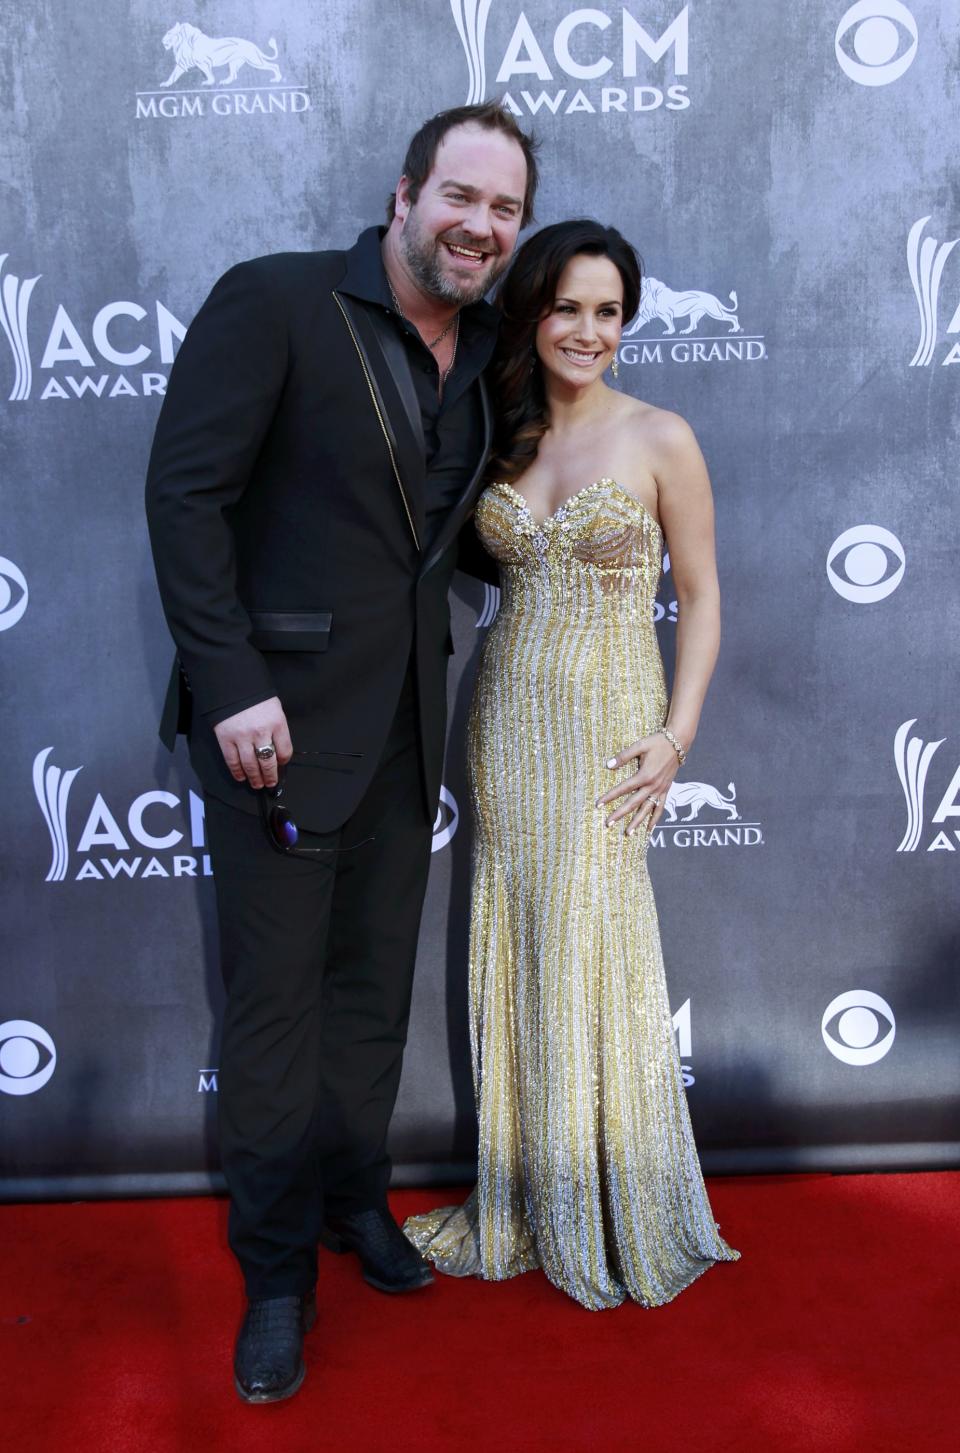 Country music artist Lee Brice and his wife Sara Reeveley arrive at the 49th Annual Academy of Country Music Awards in Las Vegas, Nevada April 6, 2014. REUTERS/Steve Marcus (UNITED STATES - Tags: ENTERTAINMENT) (ACMAWARDS-ARRIVALS)